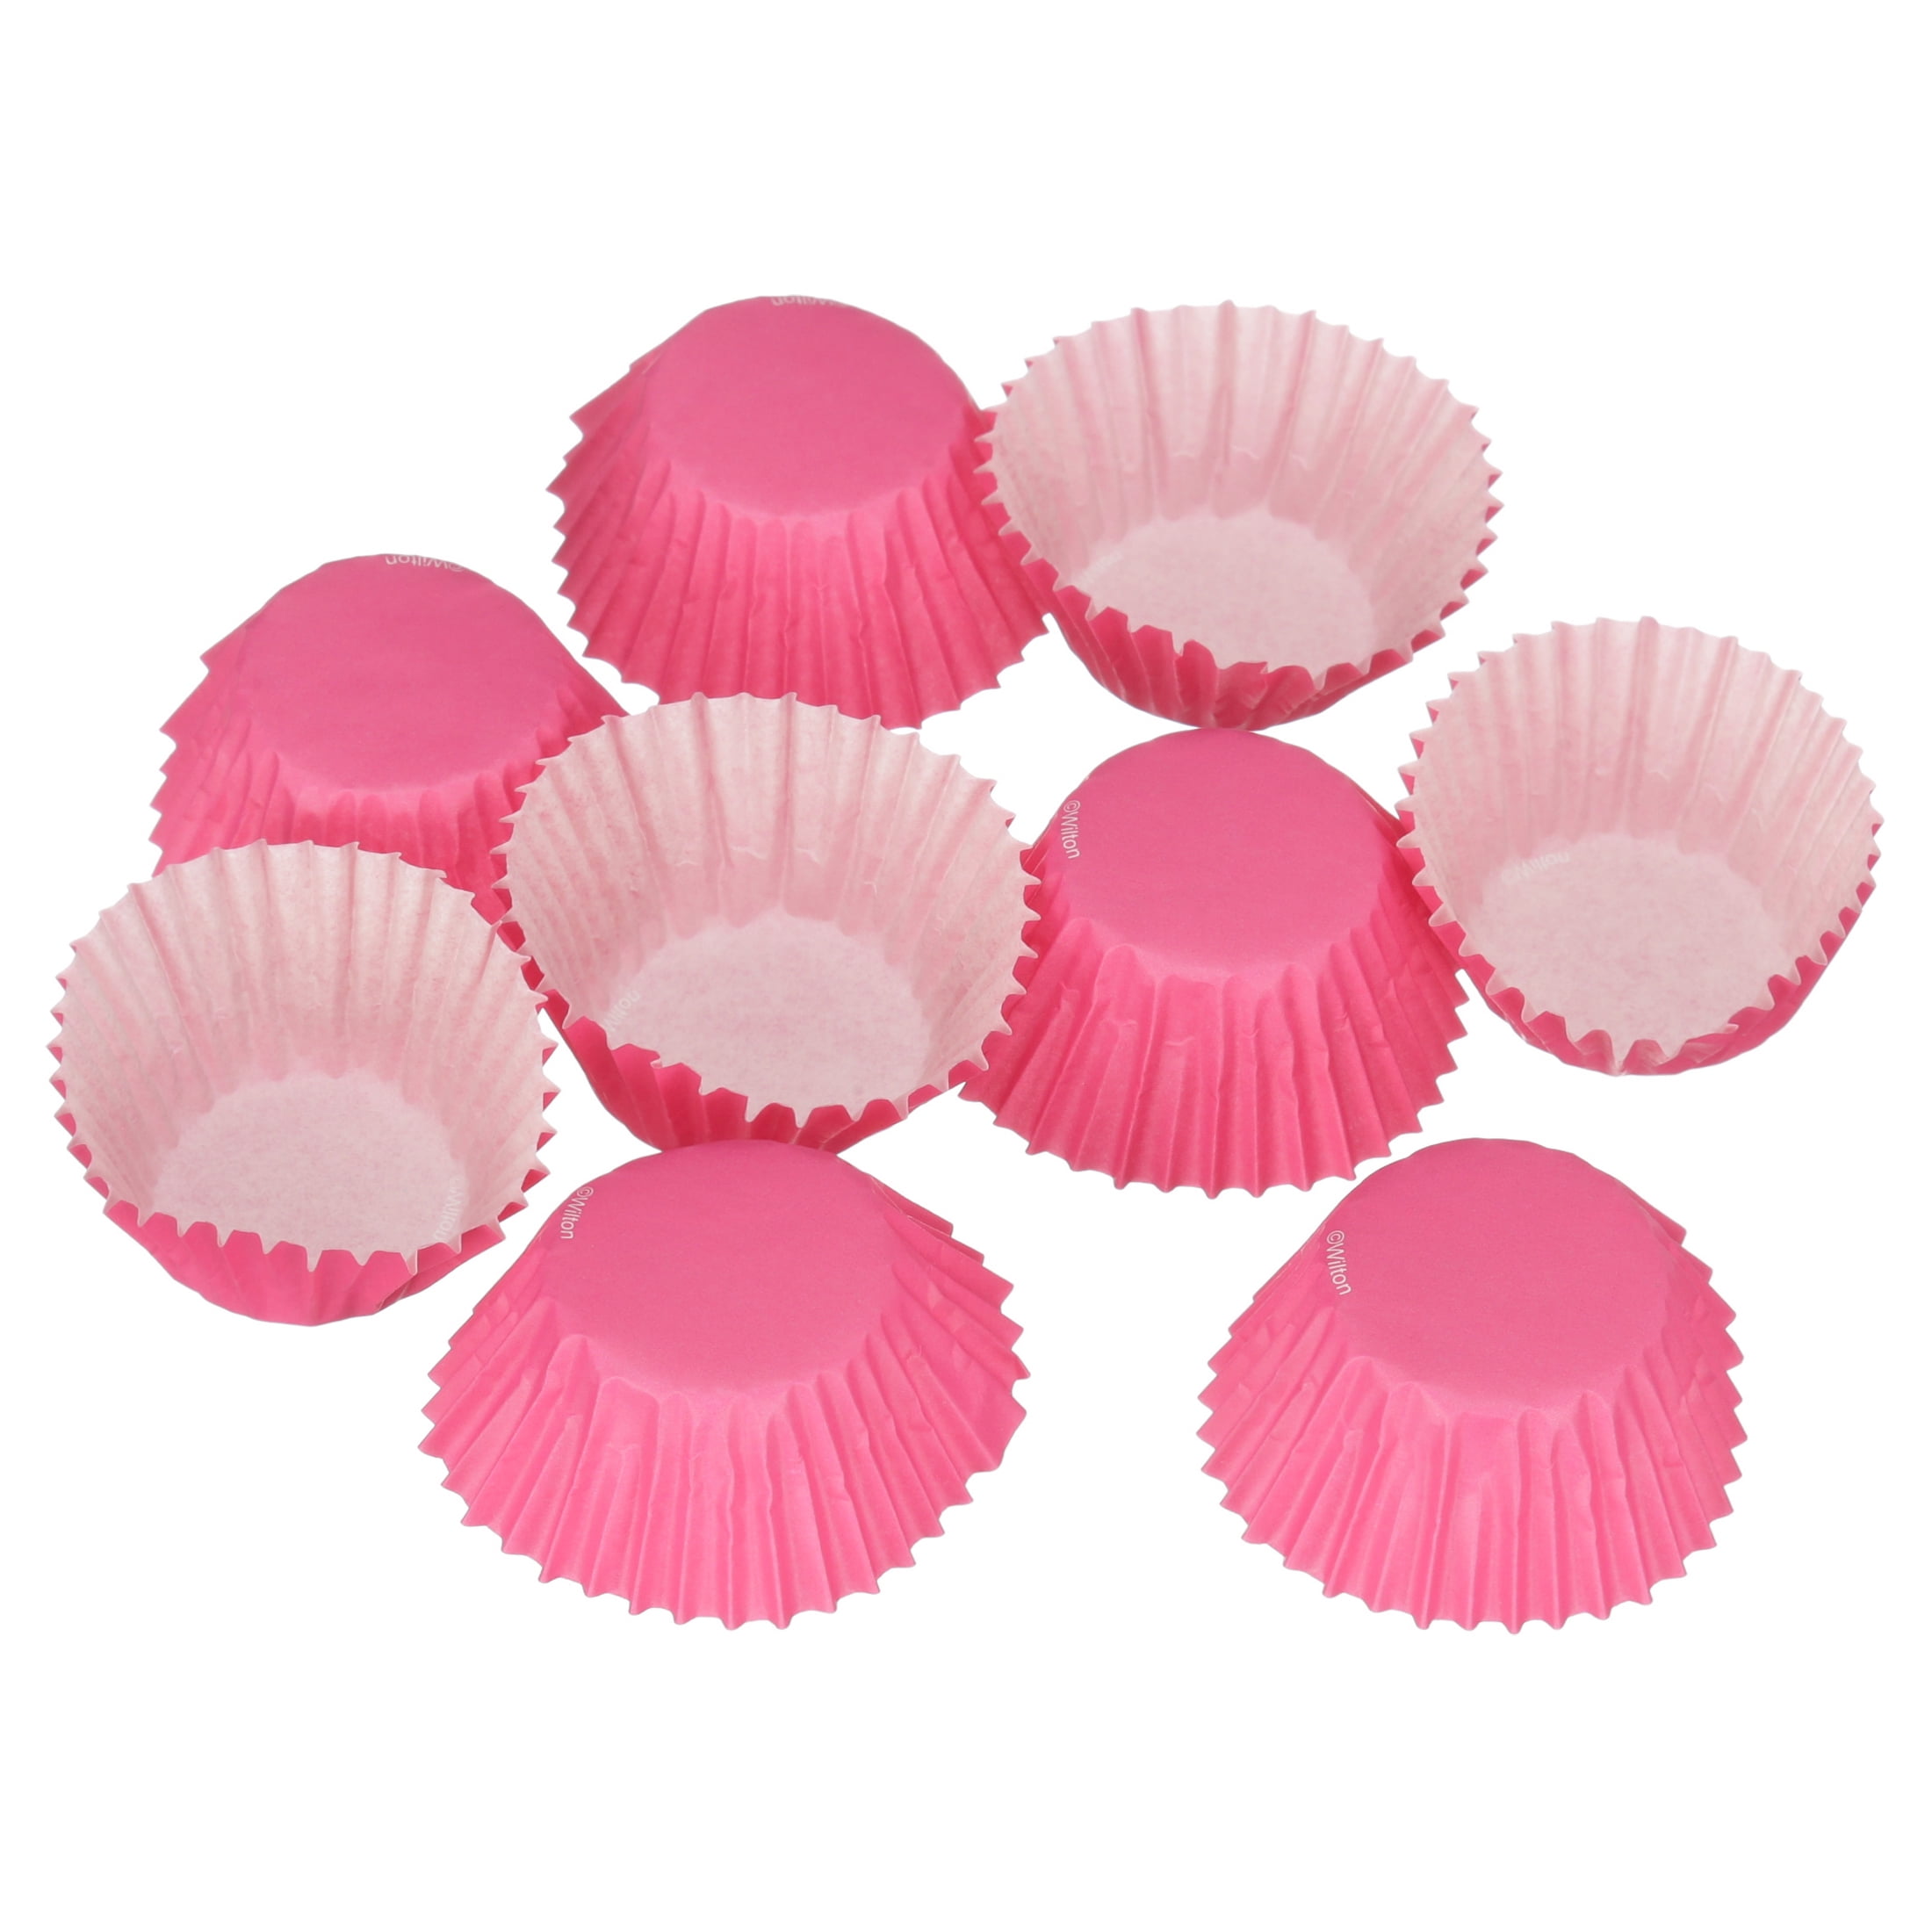 DecoPac Sachet Pink Scalloped Baking Cups, Pack of 50, Perfect For  Delicious Cupcakes, Delicate Scalloped Edge, 50 Oven Safe Cupcake Cases,50